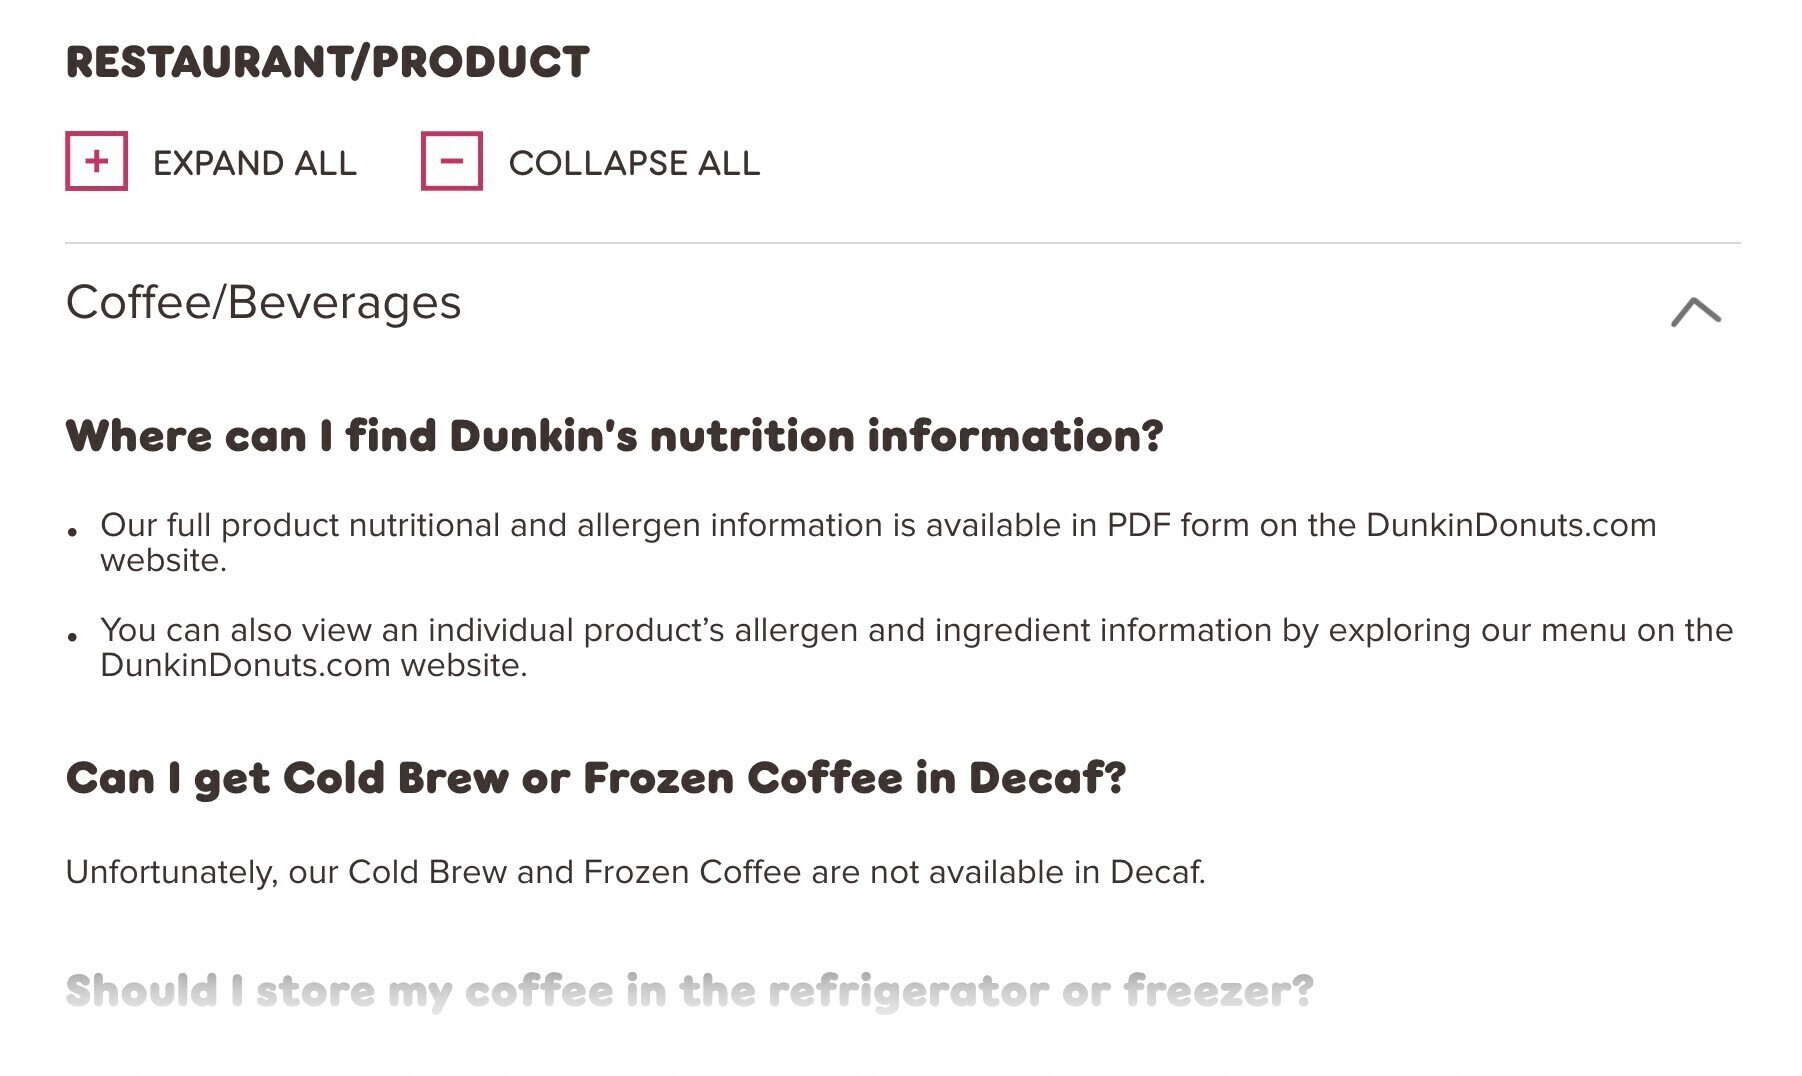 dunkin donuts specific question